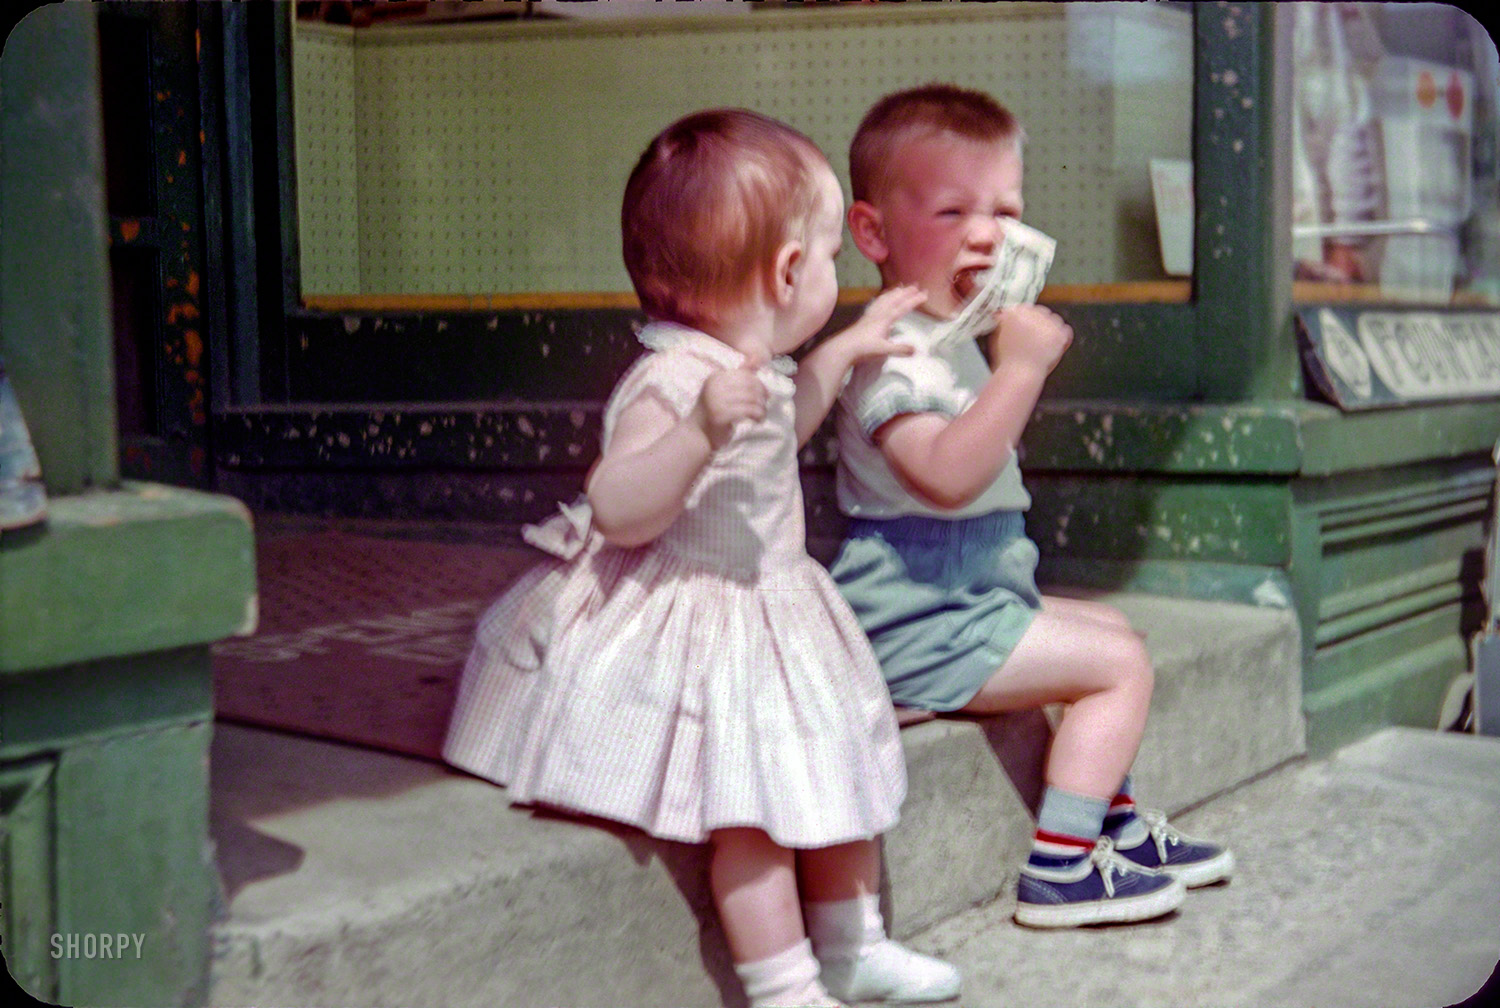 "Wait a minute, Bubba, I think you're doing that wrong." Circa 1948 somewhere in New England, it's little Linda and friend at the drugstore. 35mm Kodachrome slide found on eBay, resuscitated with NikonScan and Photoshop. View full size.